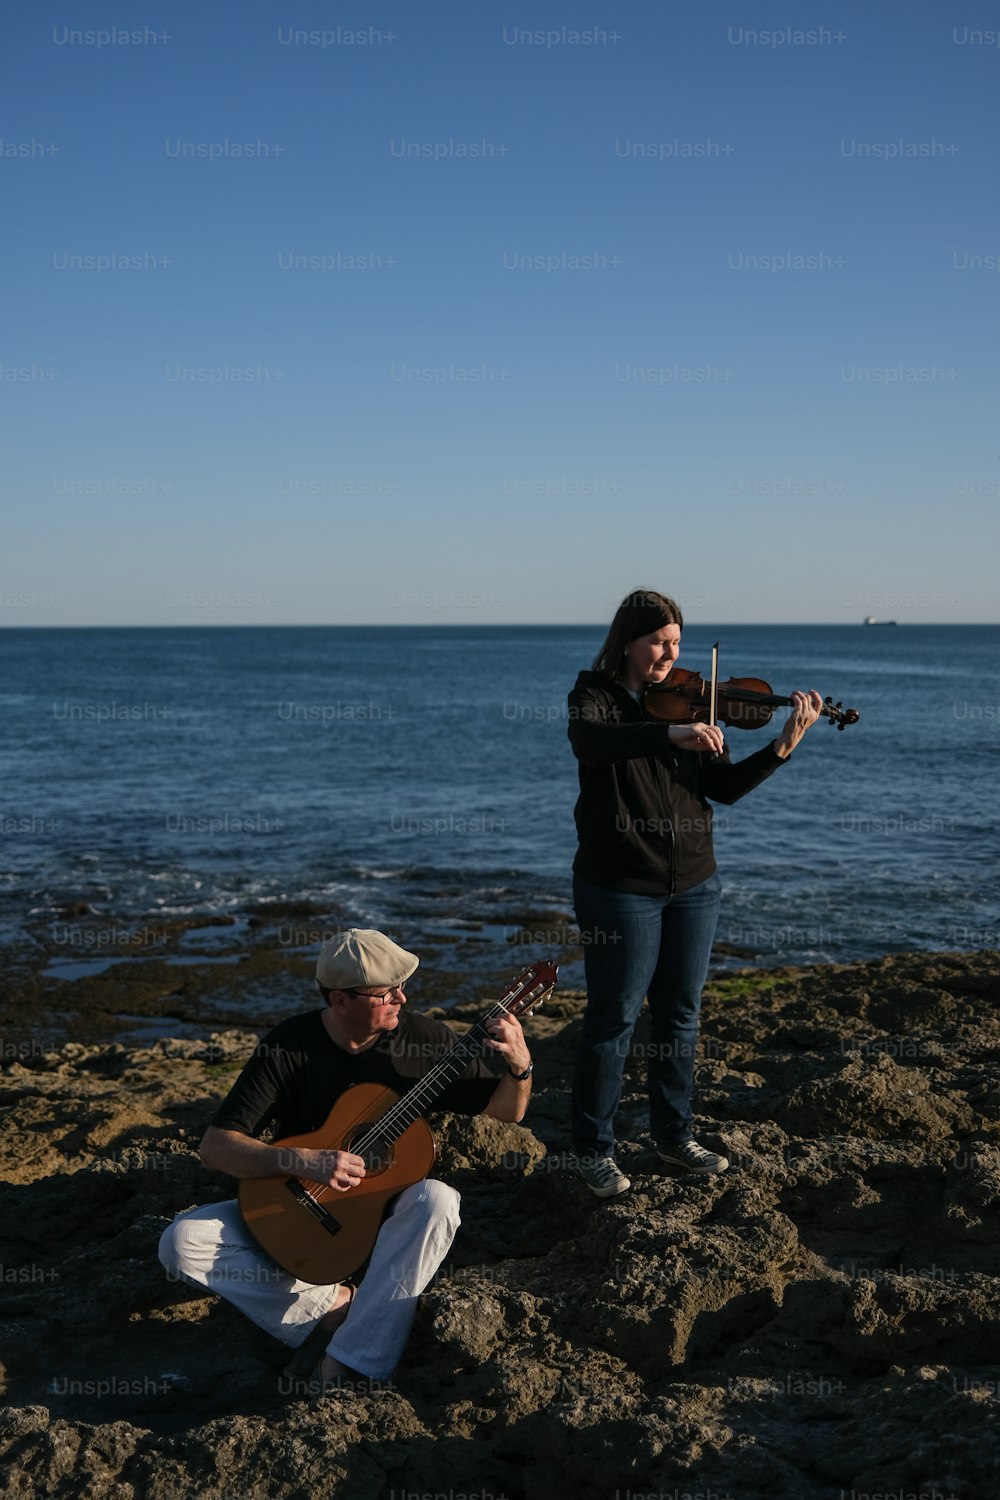 a man playing a violin and a woman playing a guitar on the beach